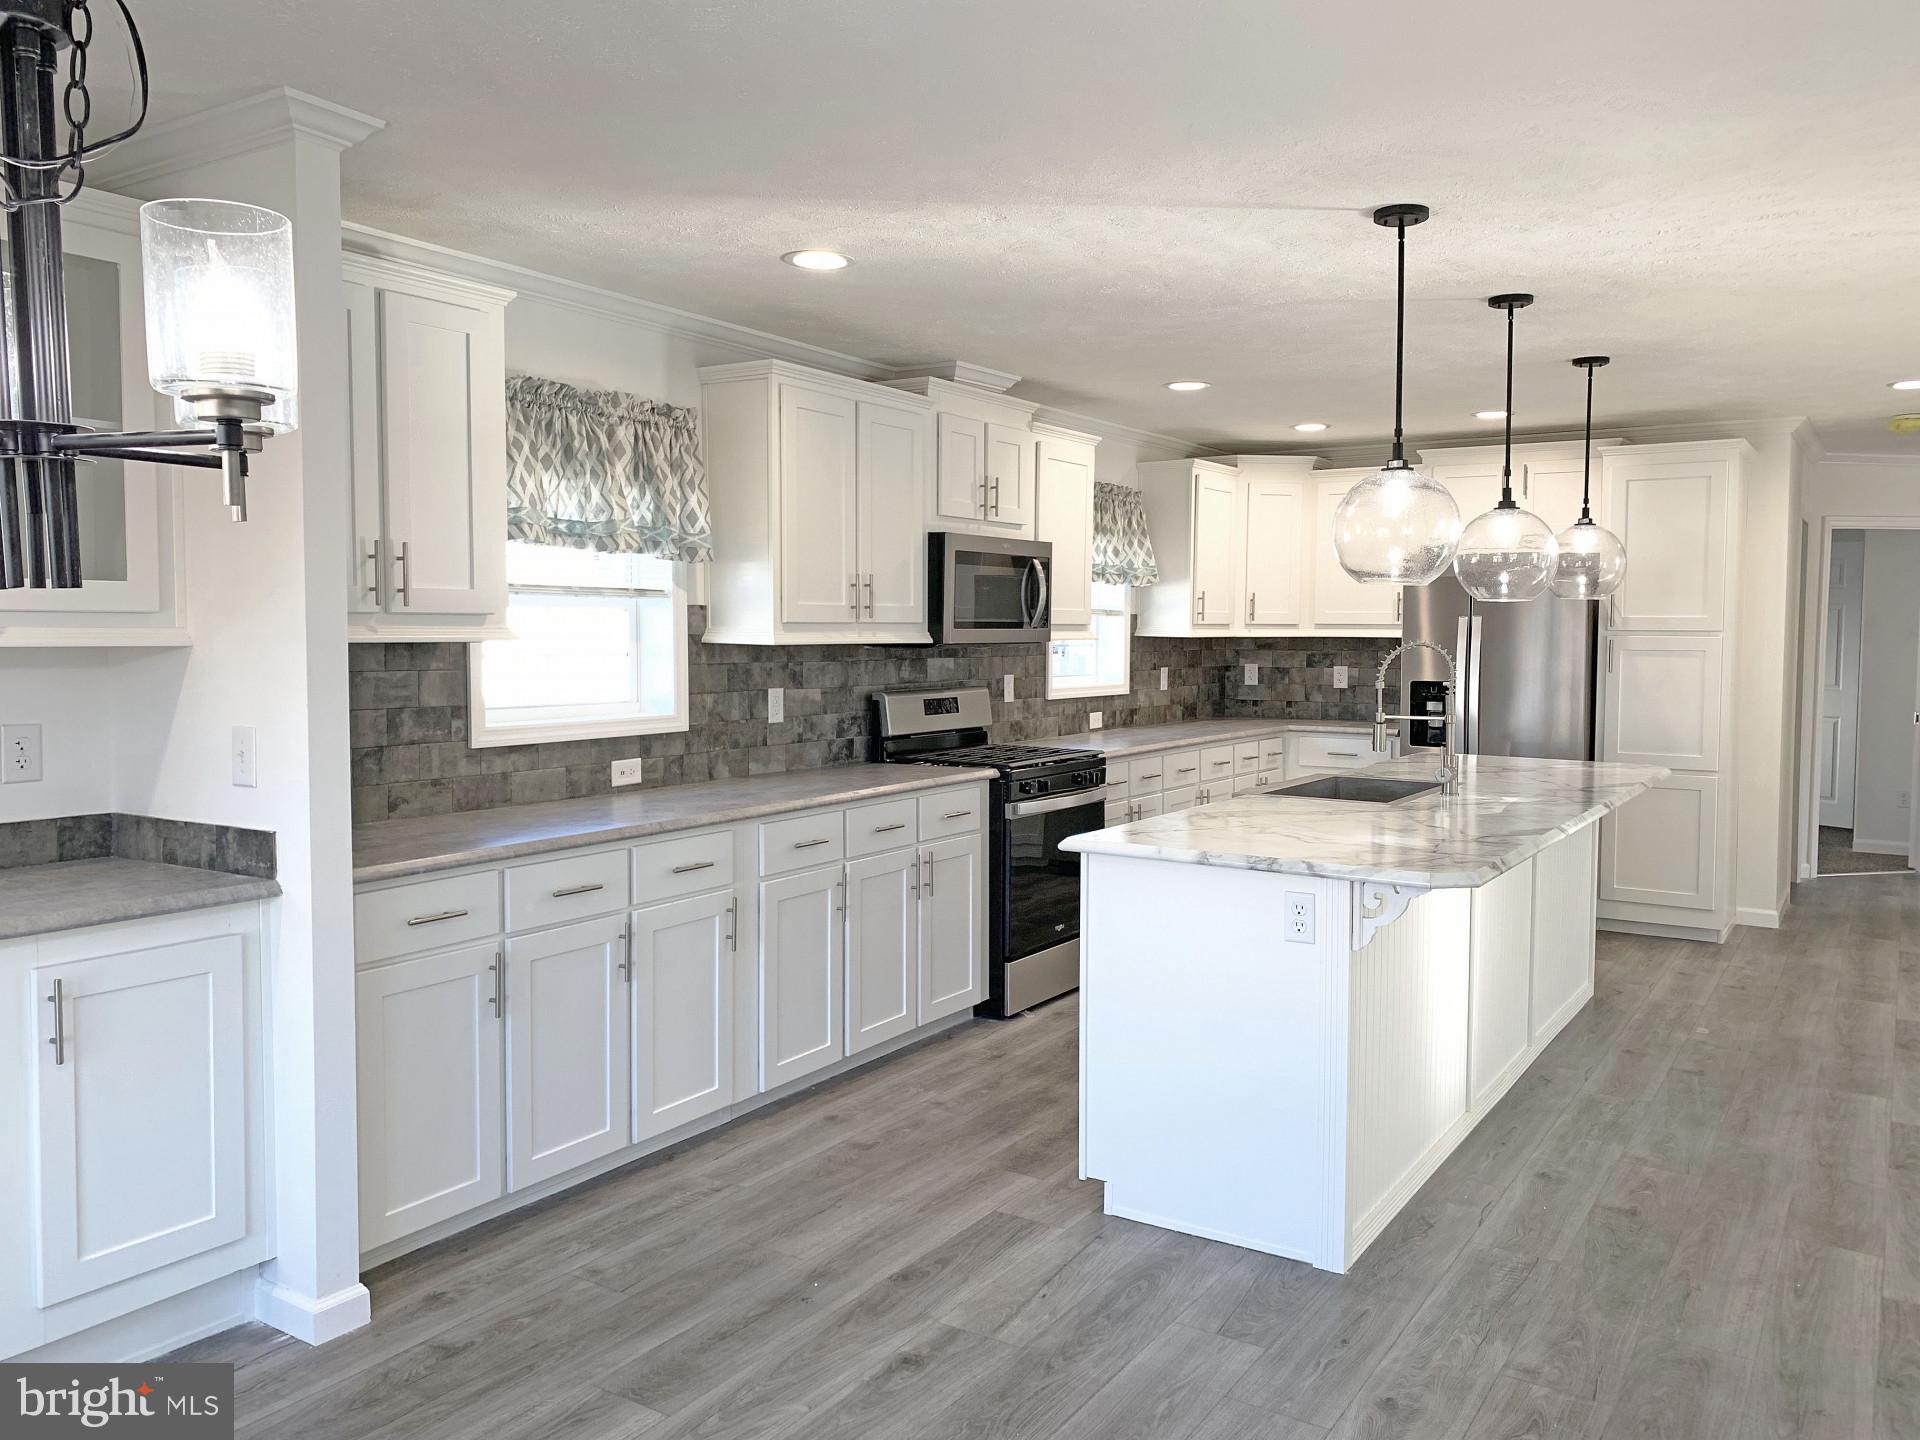 a large kitchen with stainless steel appliances kitchen island granite countertop a stove a sink a refrigerator and white cabinets with wooden floor